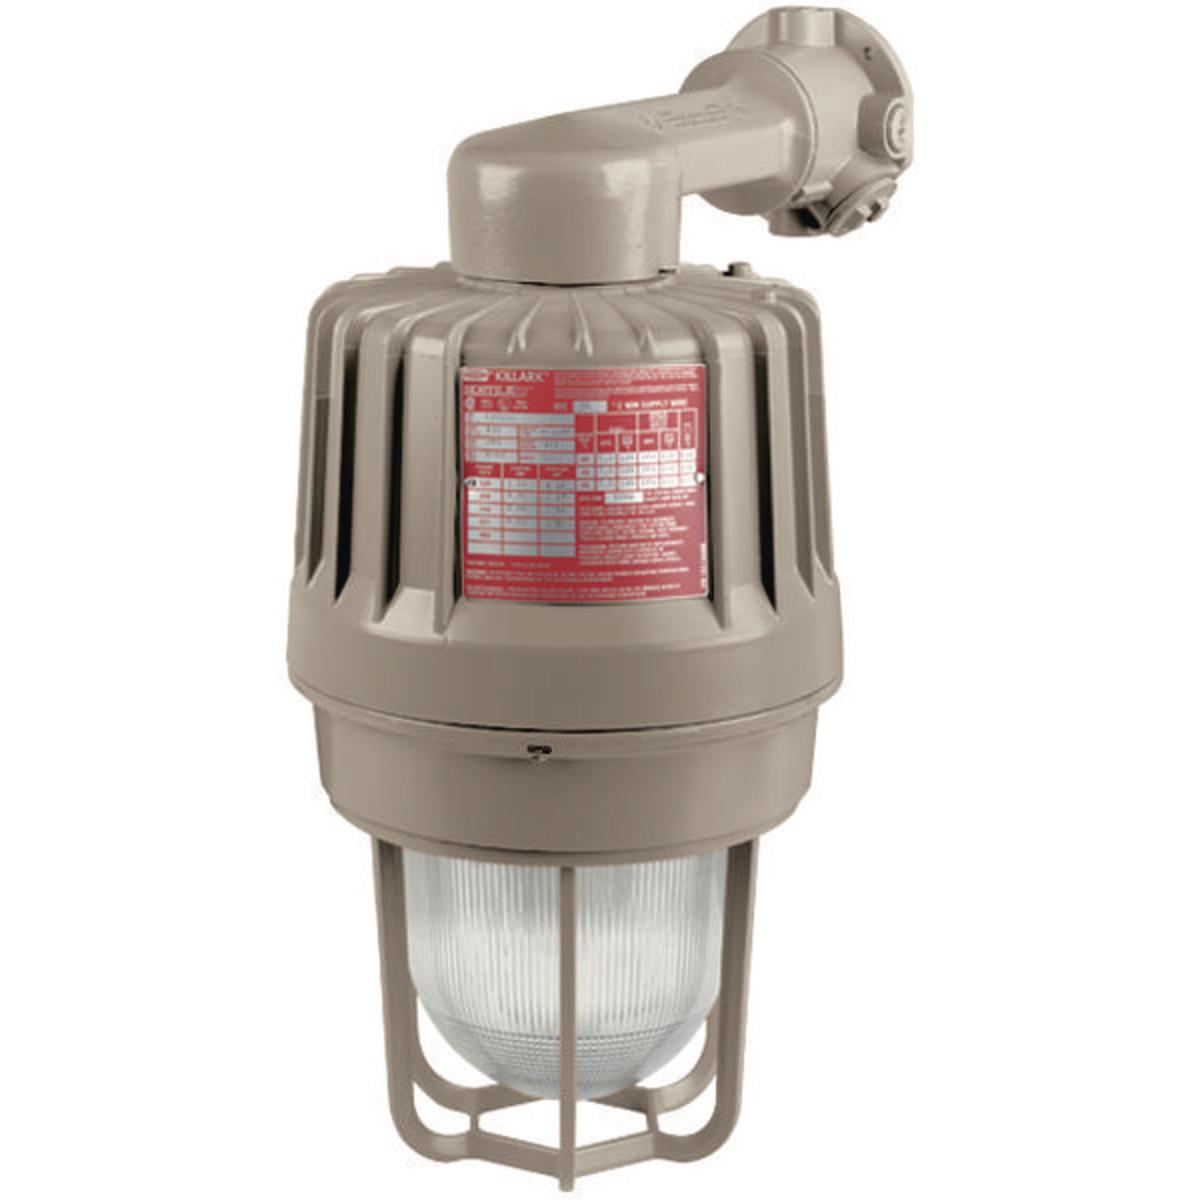 Hubbell EZL12530B3G EZL 120-277V 1" Wall Bracket Mount Fluted Globe with Guard  ; The EZL Series LED High Bay/ Low Bay fixtures are high quality explosion proof light fixtures. Designed to go into the harshest environments where explosive vapors are present .